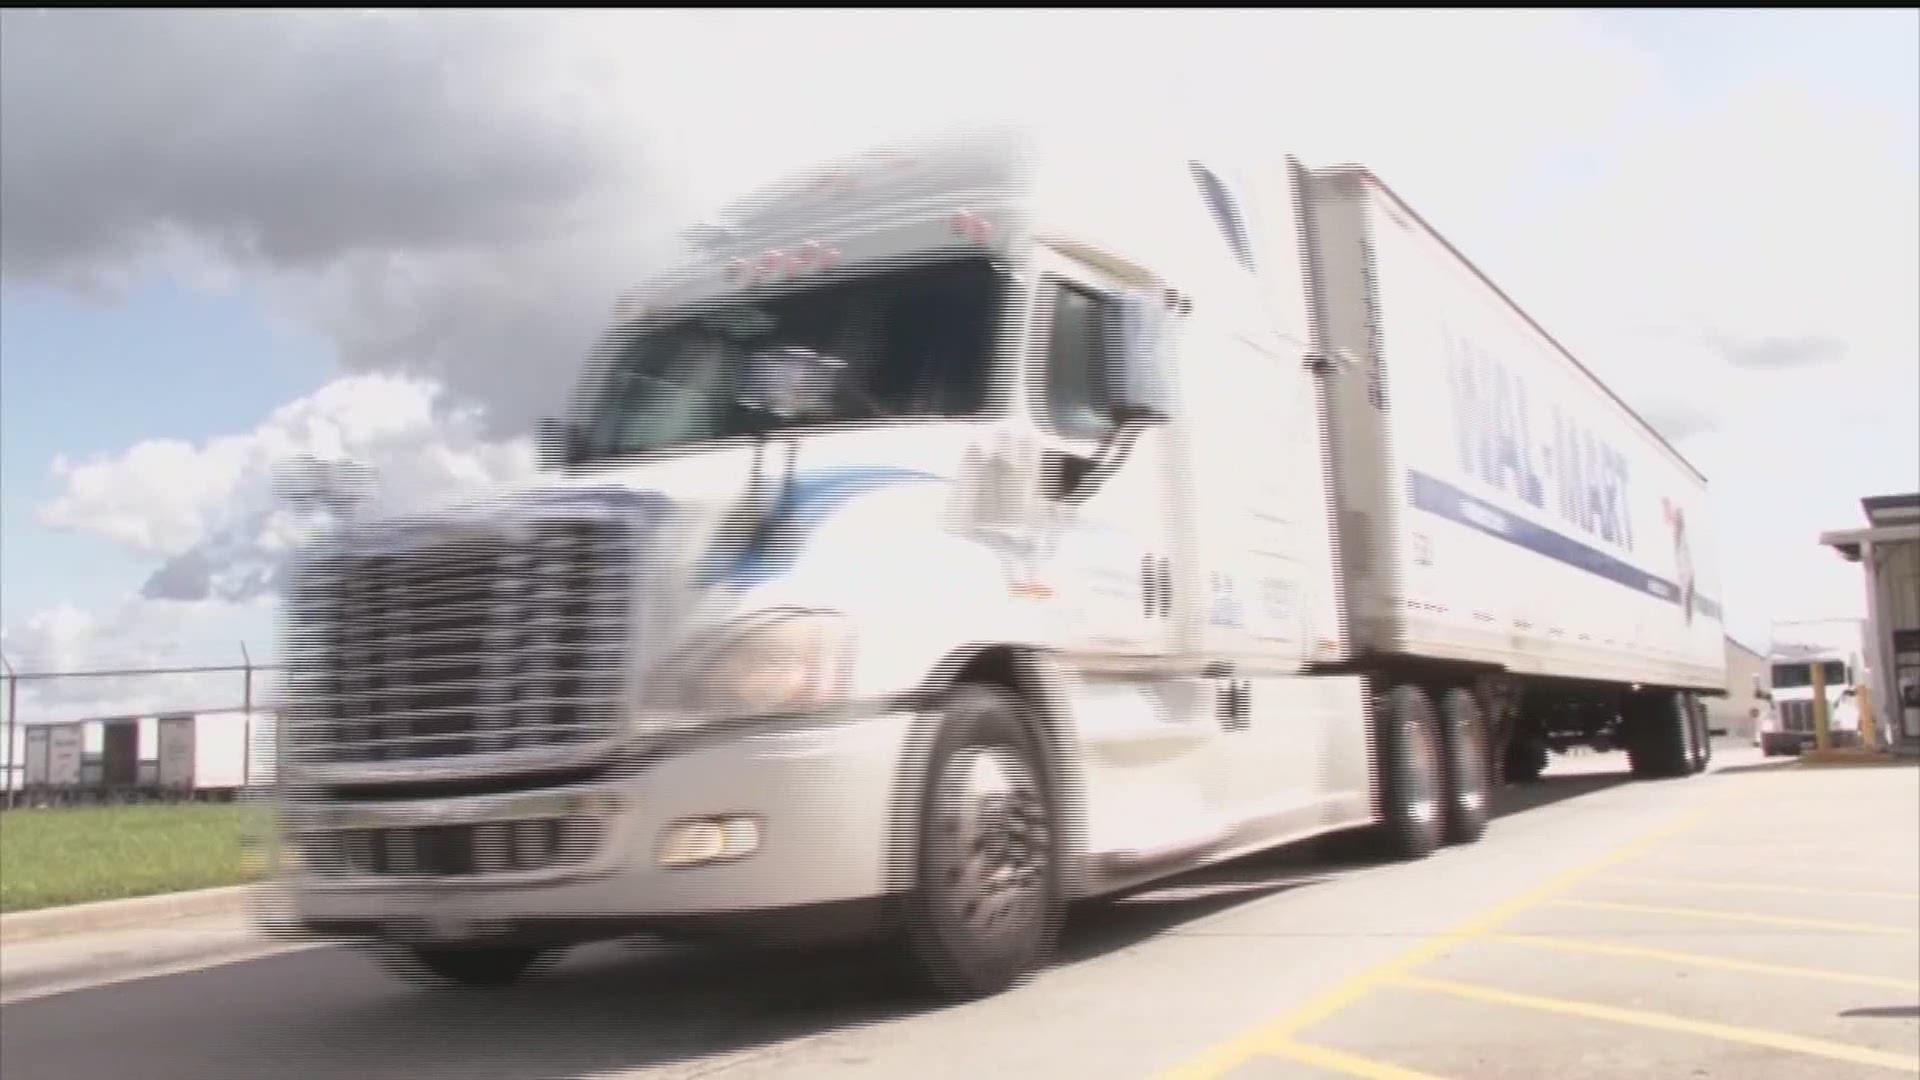 Truck drivers delivering vital supplies struggle to find resources during Coronavirus outbreak